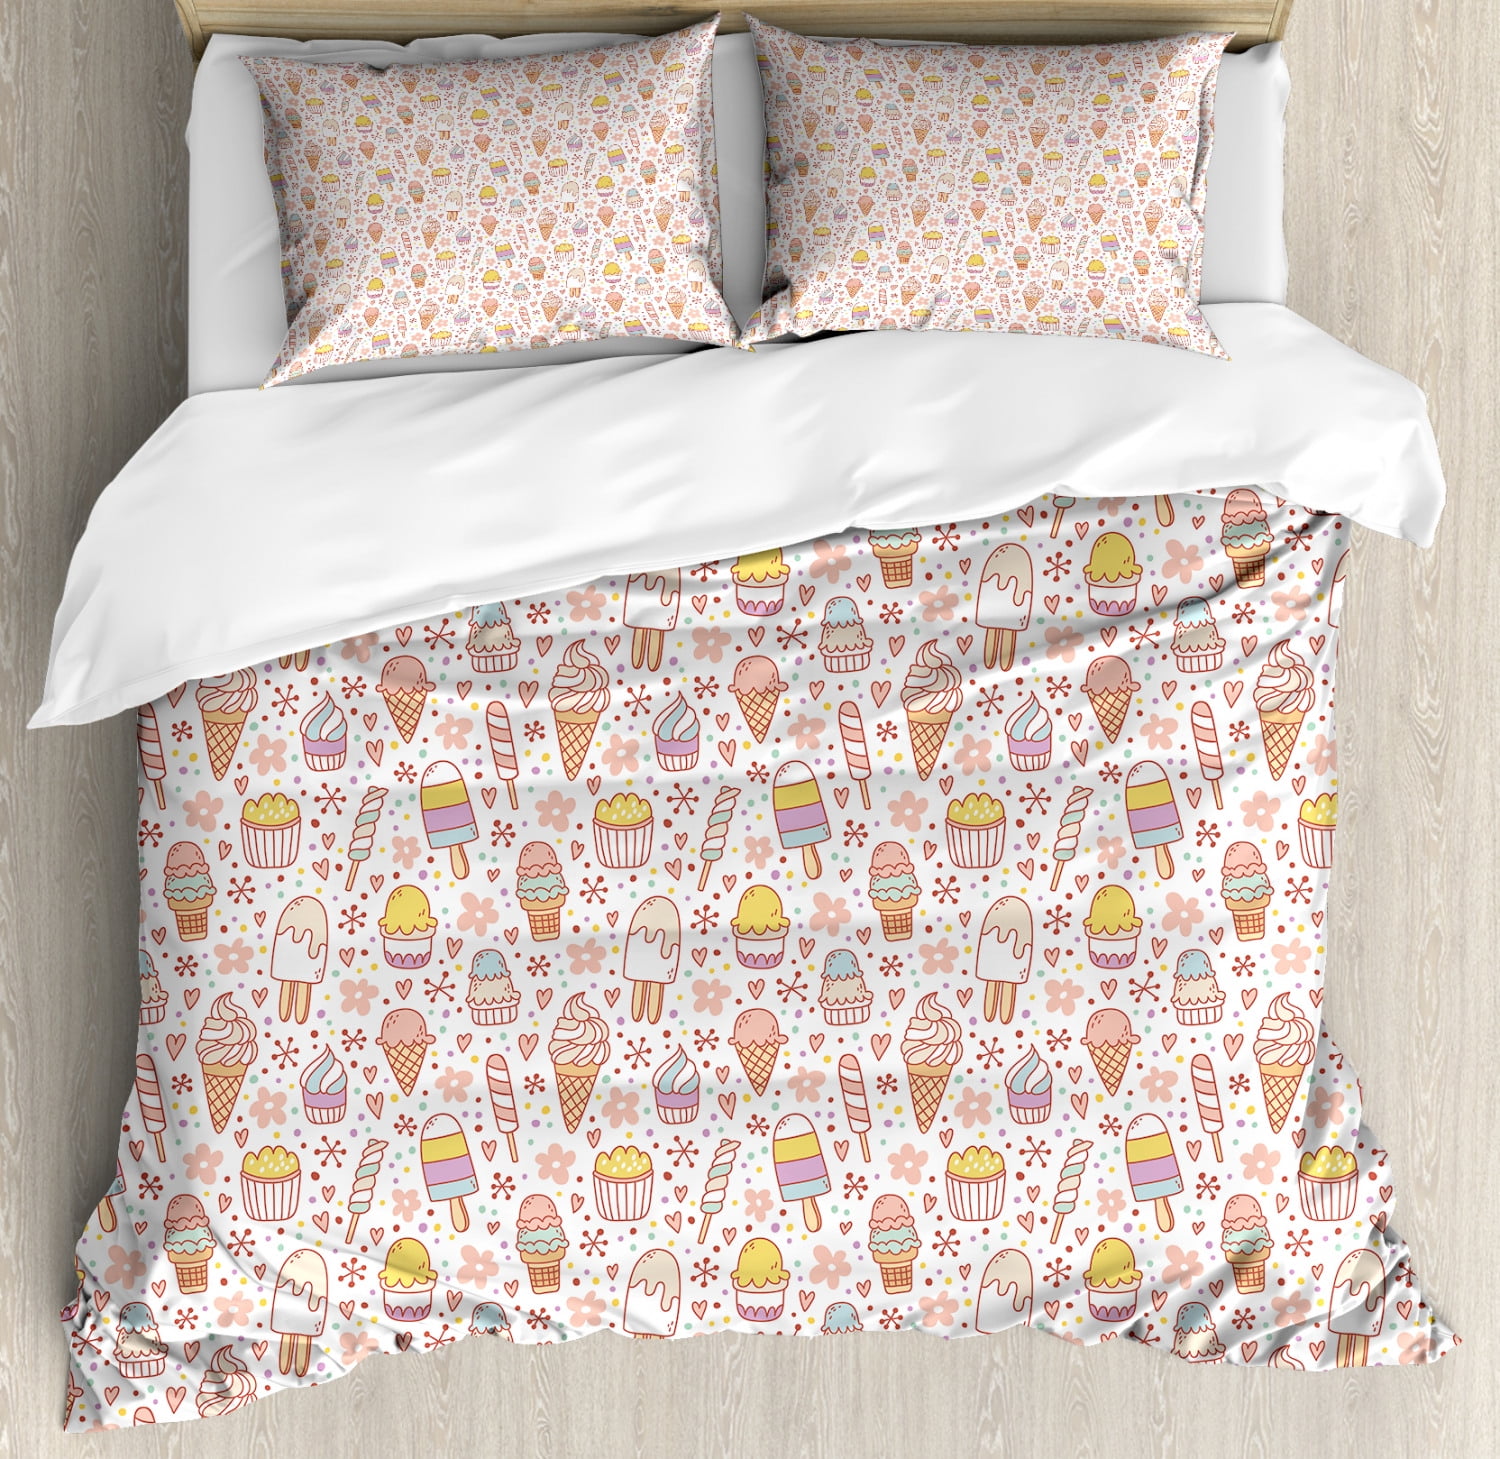 Ice Cream Duvet Cover Set, Cute Candies and Yummy Heart Figures Summer ...